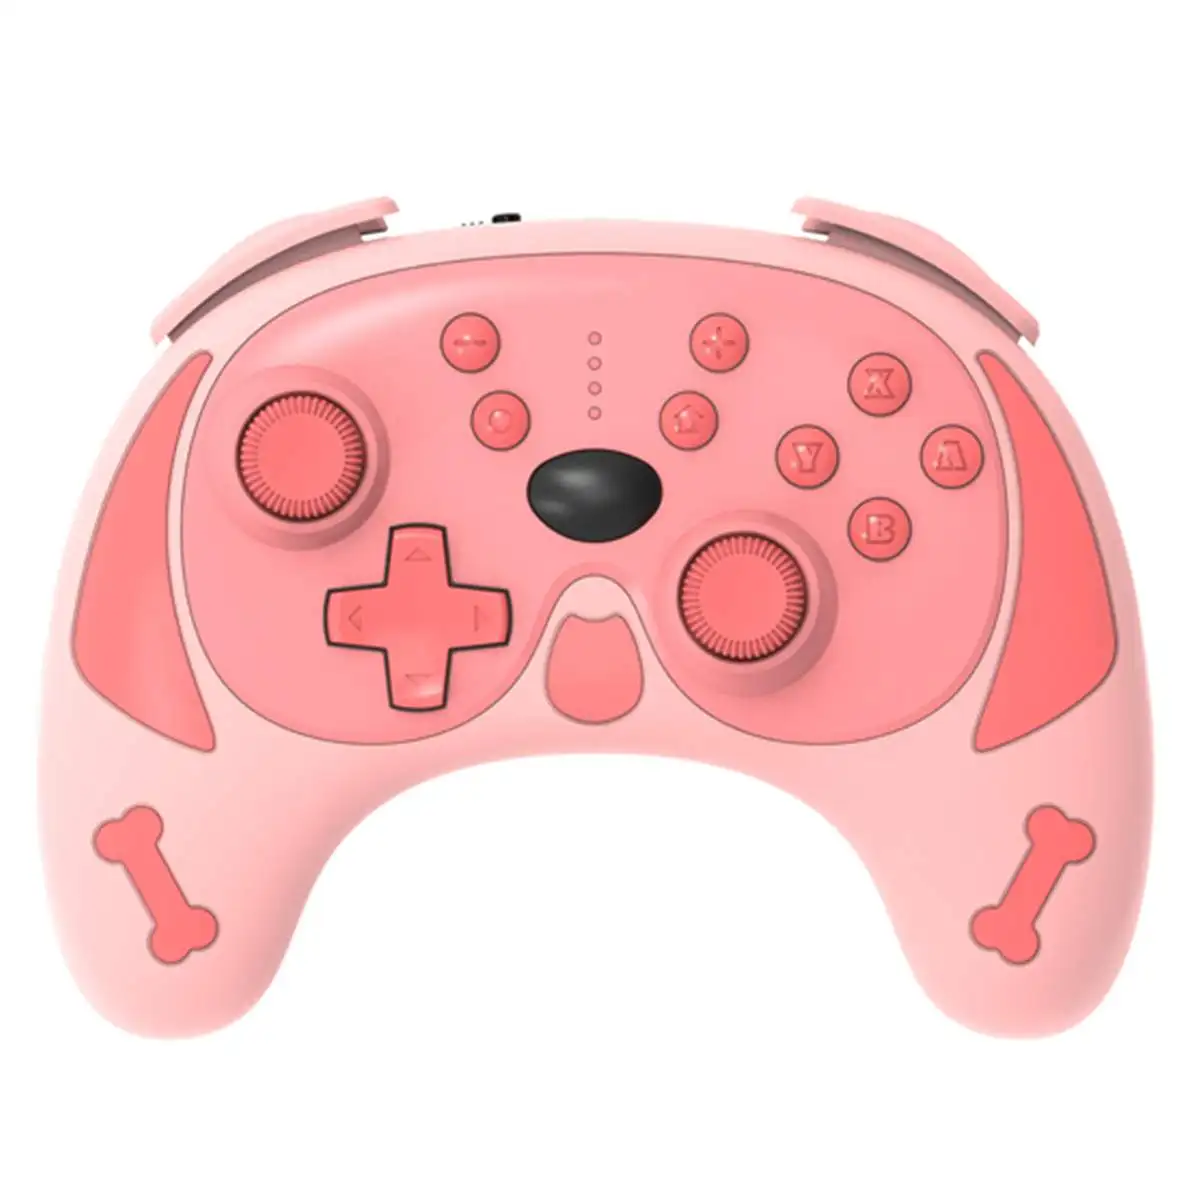 2022.For Ninendo Switch Pro Wireless Game Controller Cute Dog Shaped bluetooth Gamepad with 6-Axis Gyro Dual Motor Vibration